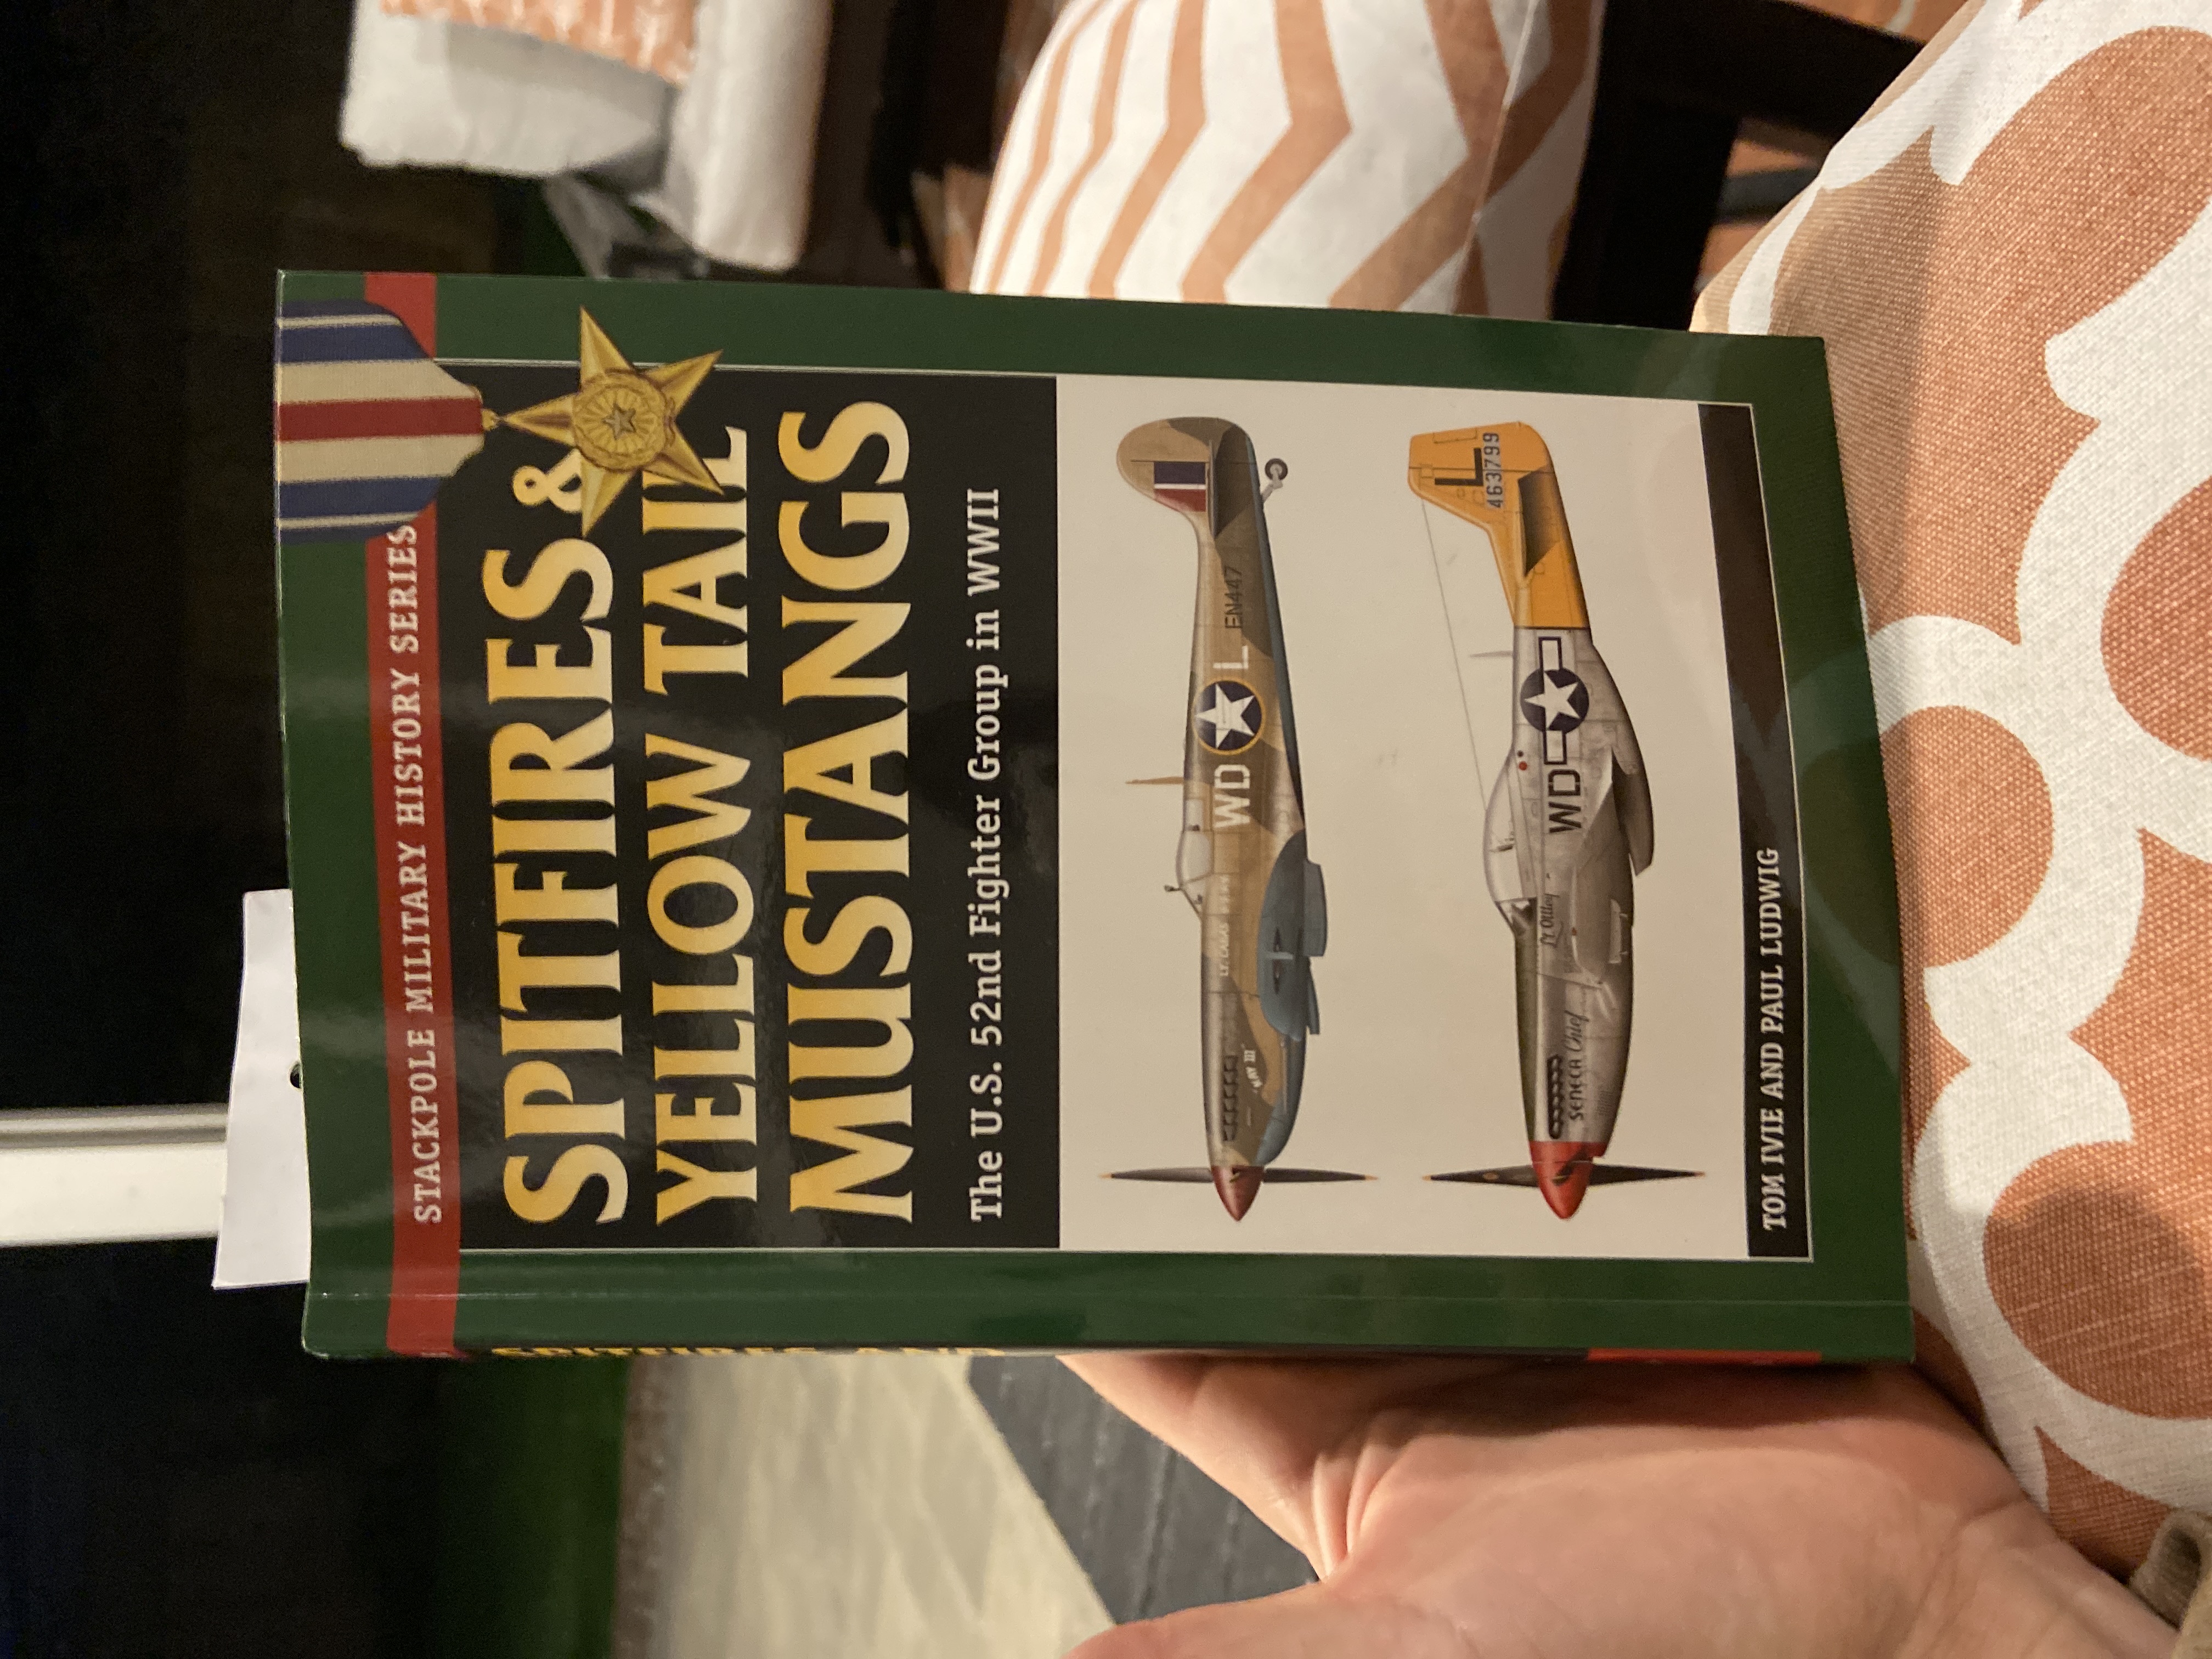 Tom Ivie, Paul Ludwig: Spitfires and Yellow Tail Mustangs (2013, Tradeselect Limited)